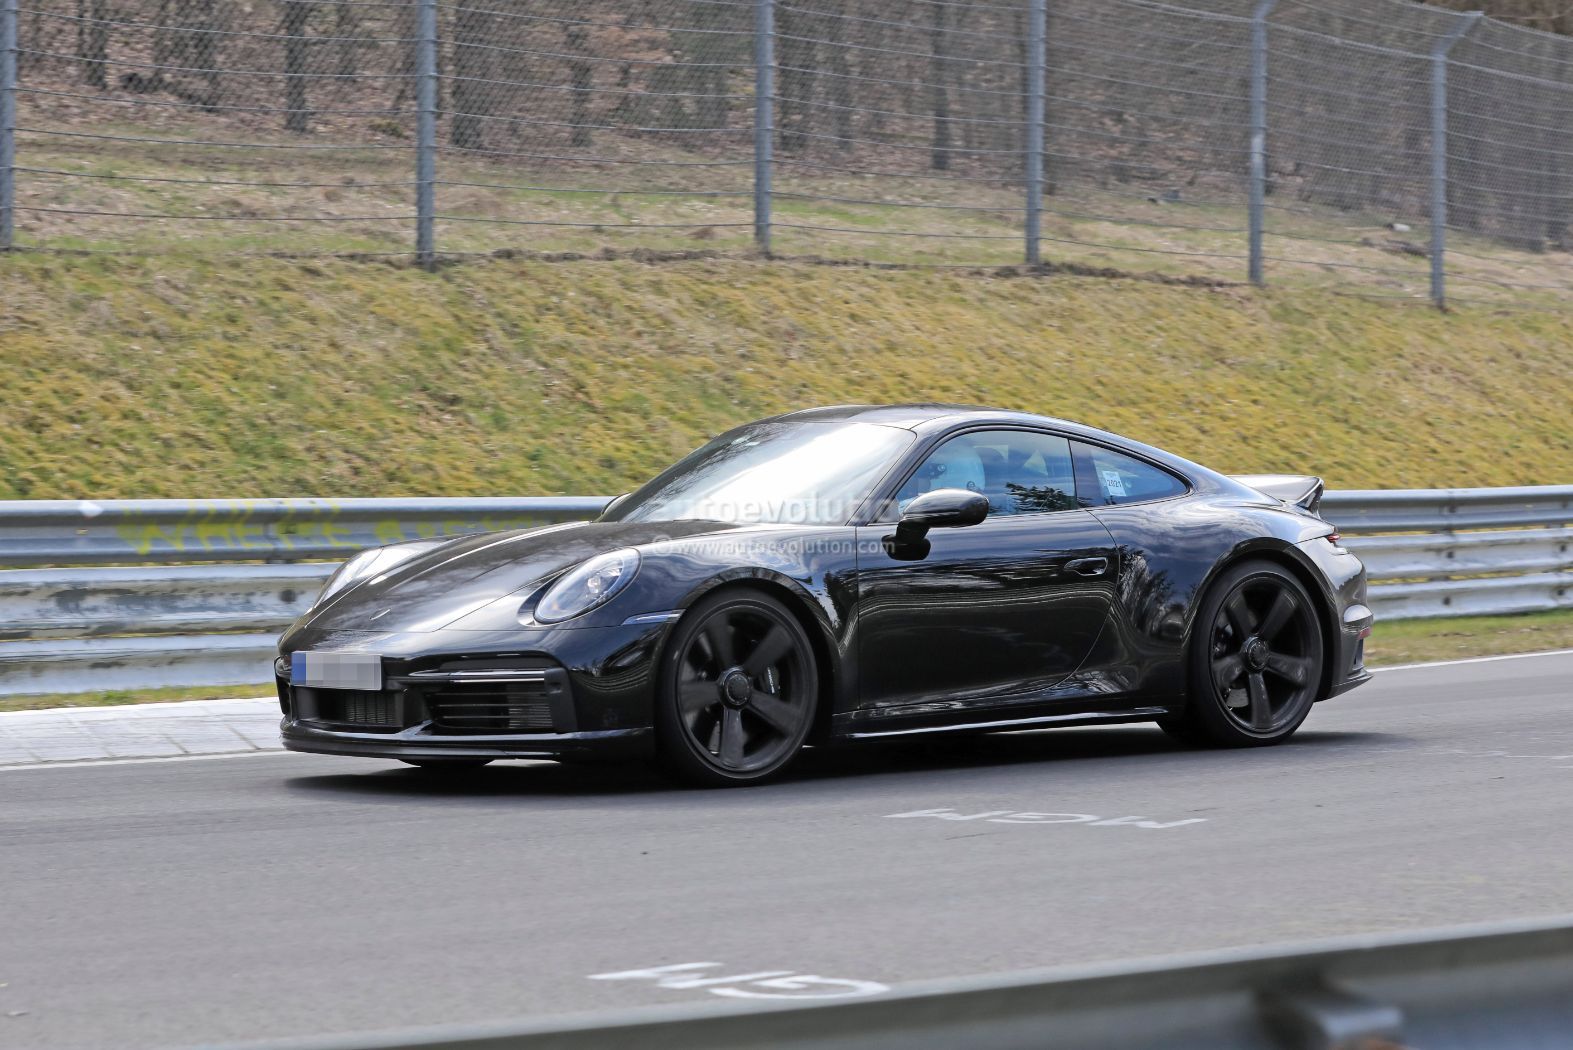 Porsche 911 (992) Sport Classic Prototype Lifts a Wheel on the